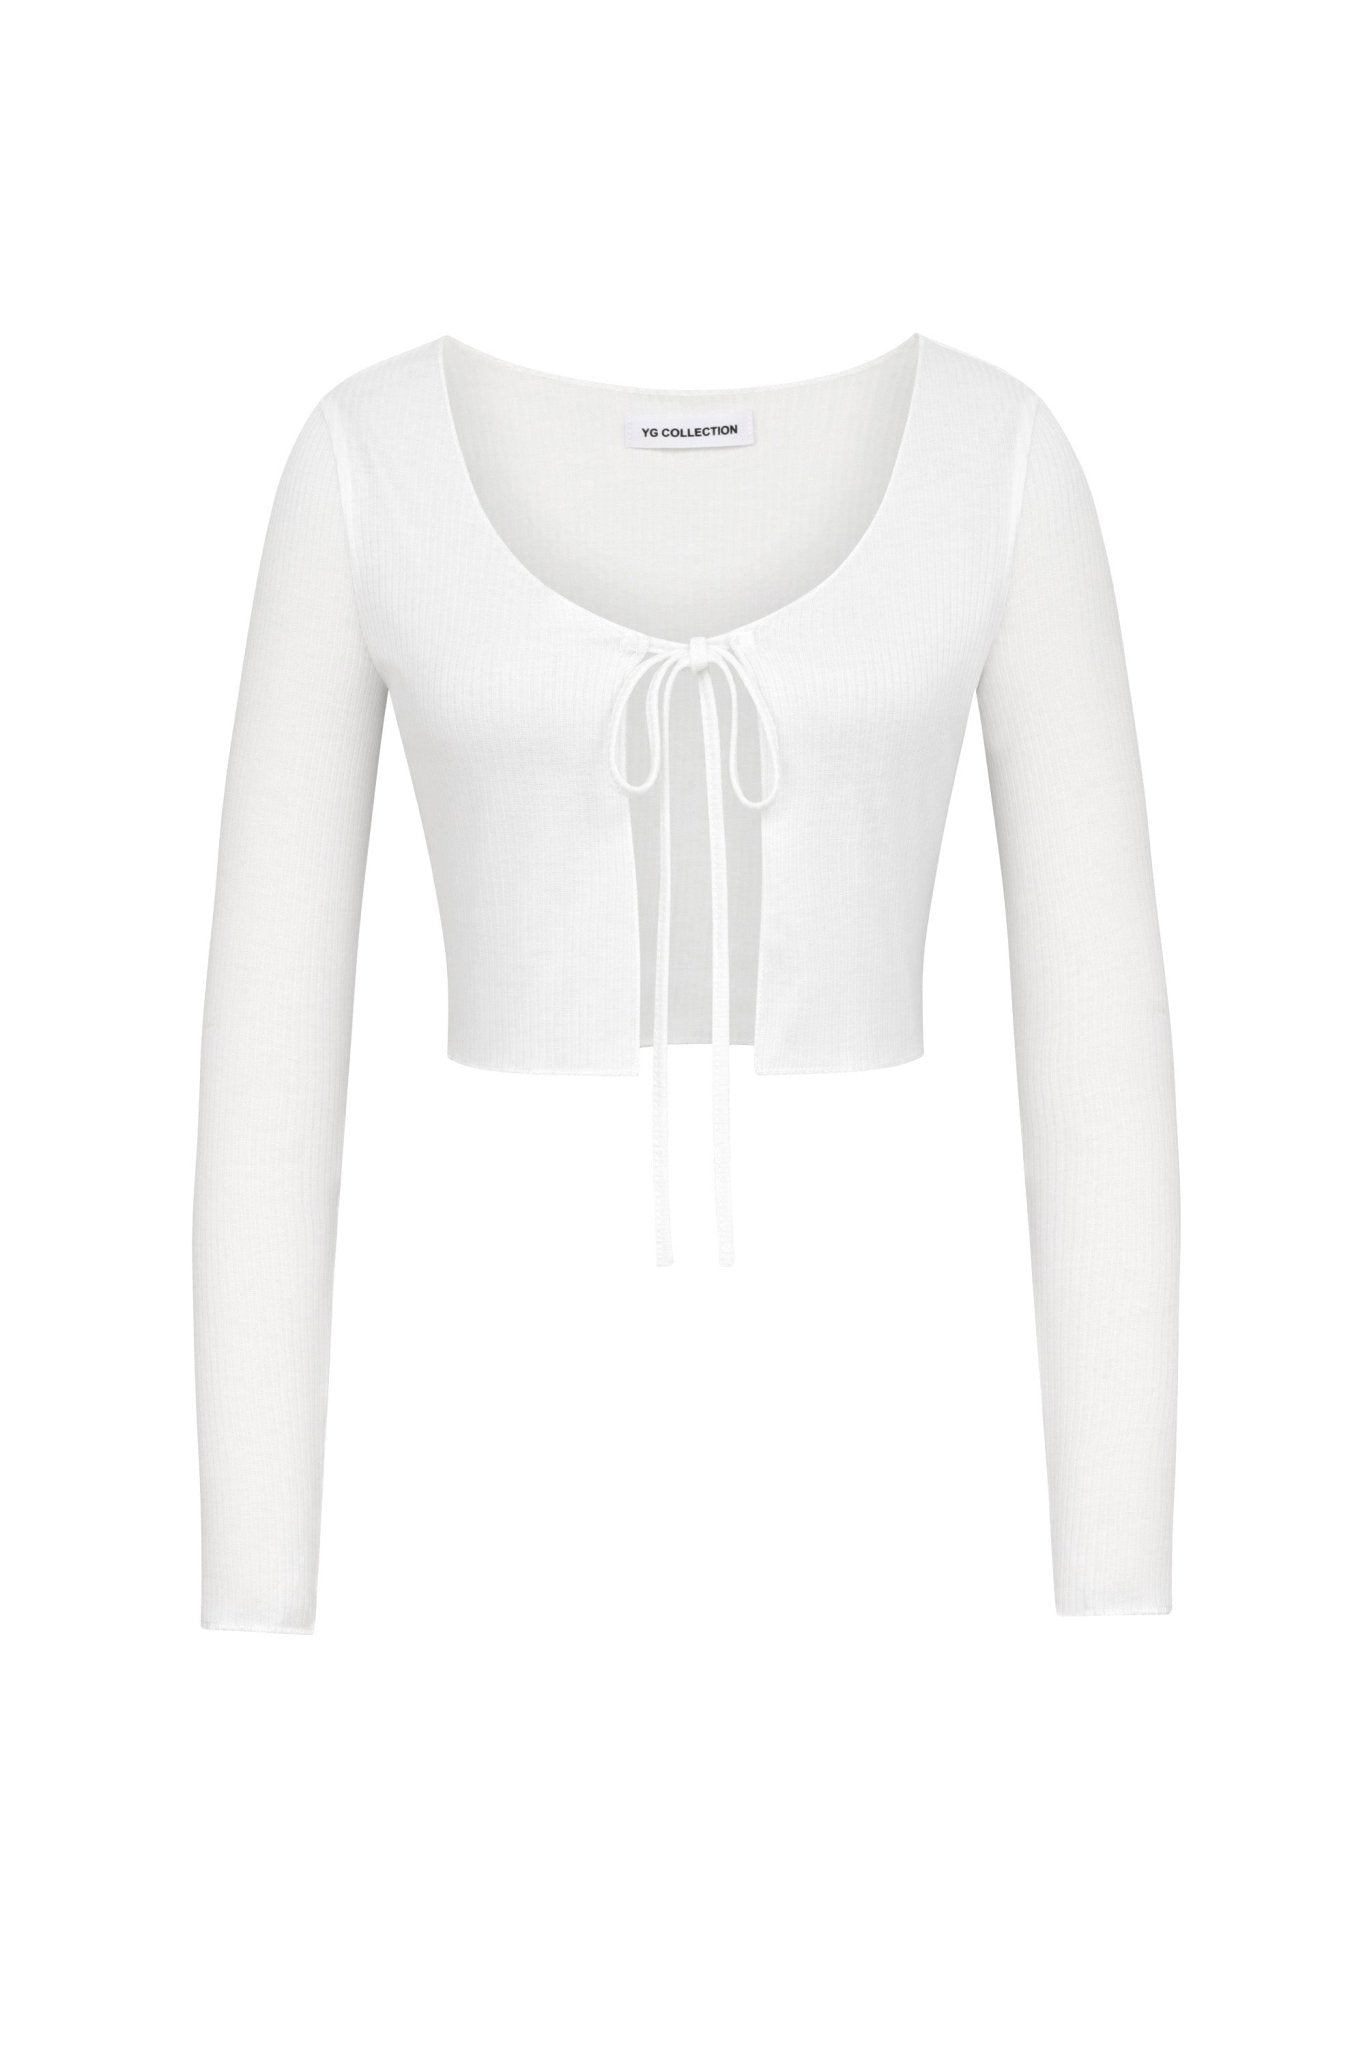 Mykonos Lace Up Top - YG COLLECTION